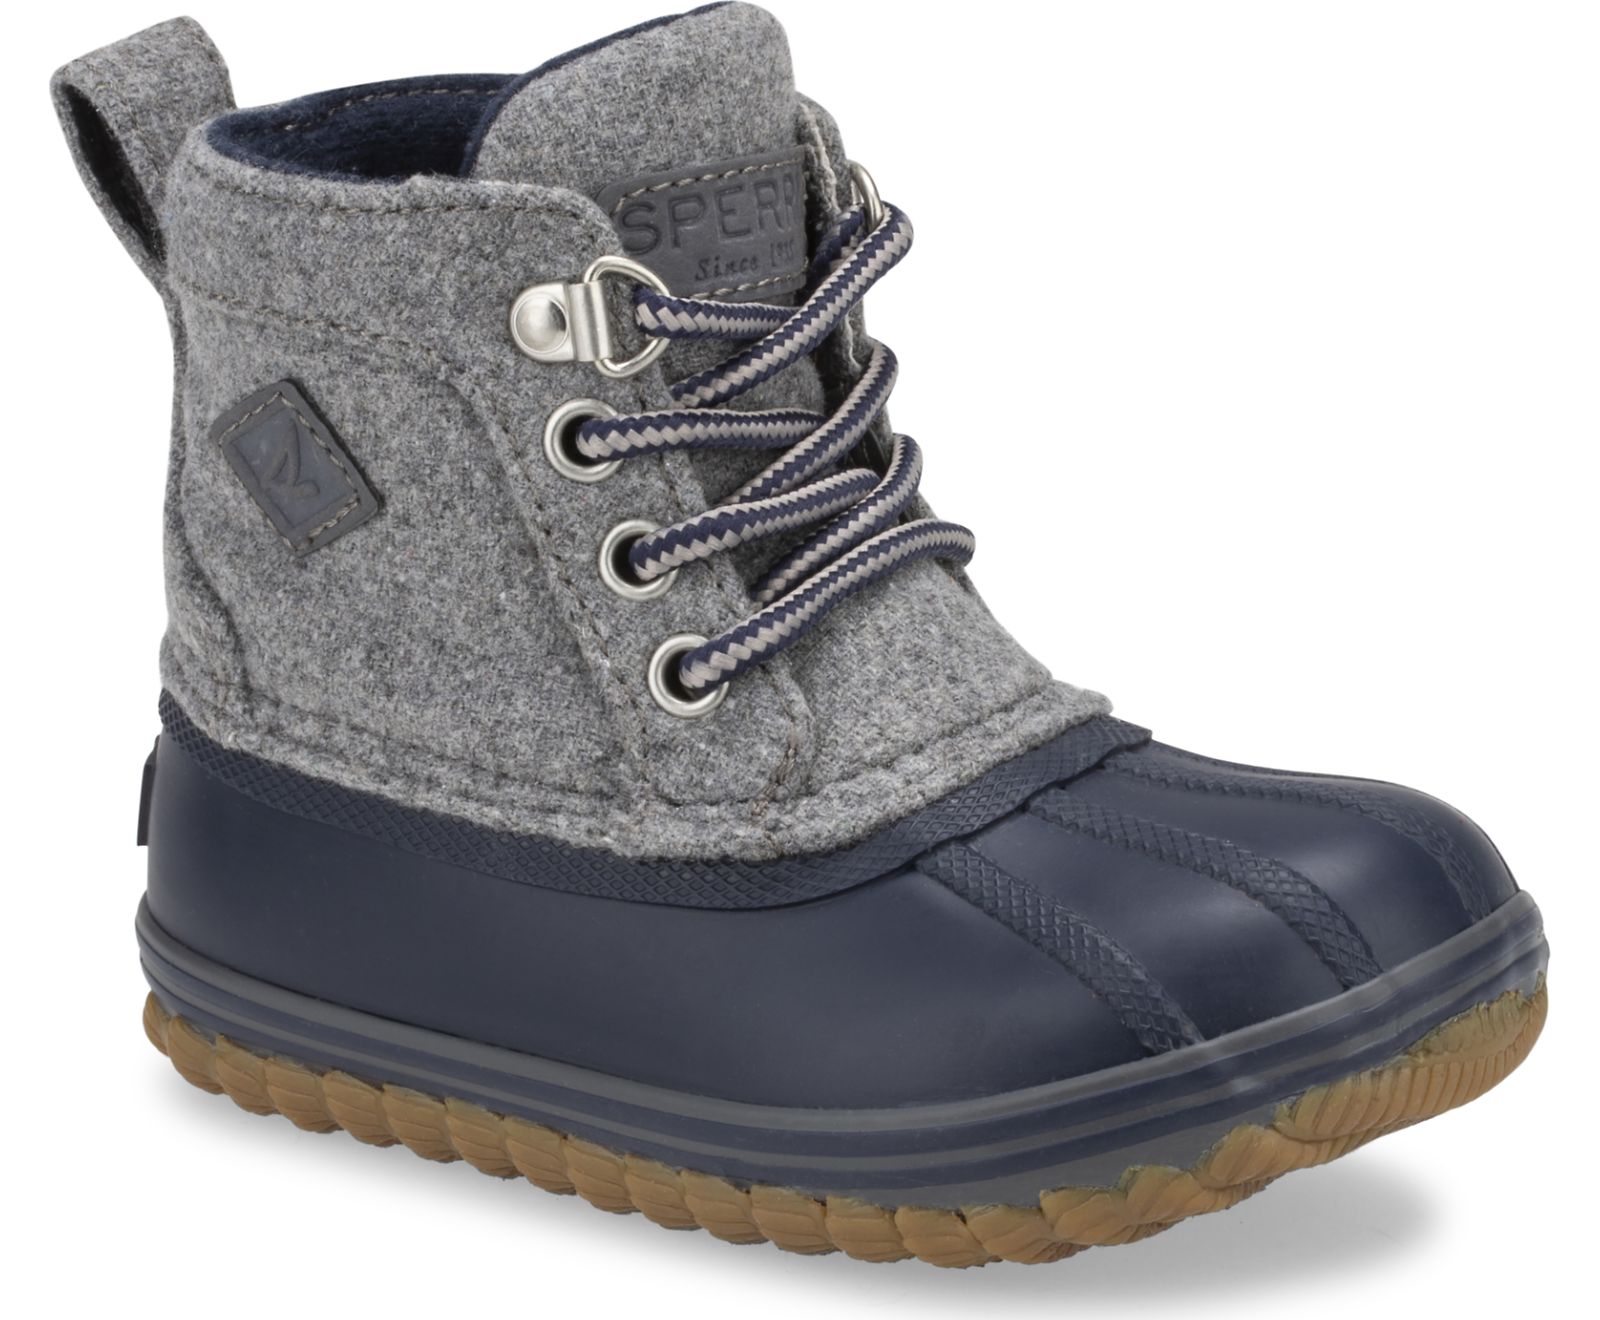 Little Kid's Bowline Boot - Grey/Navy - Click Image to Close